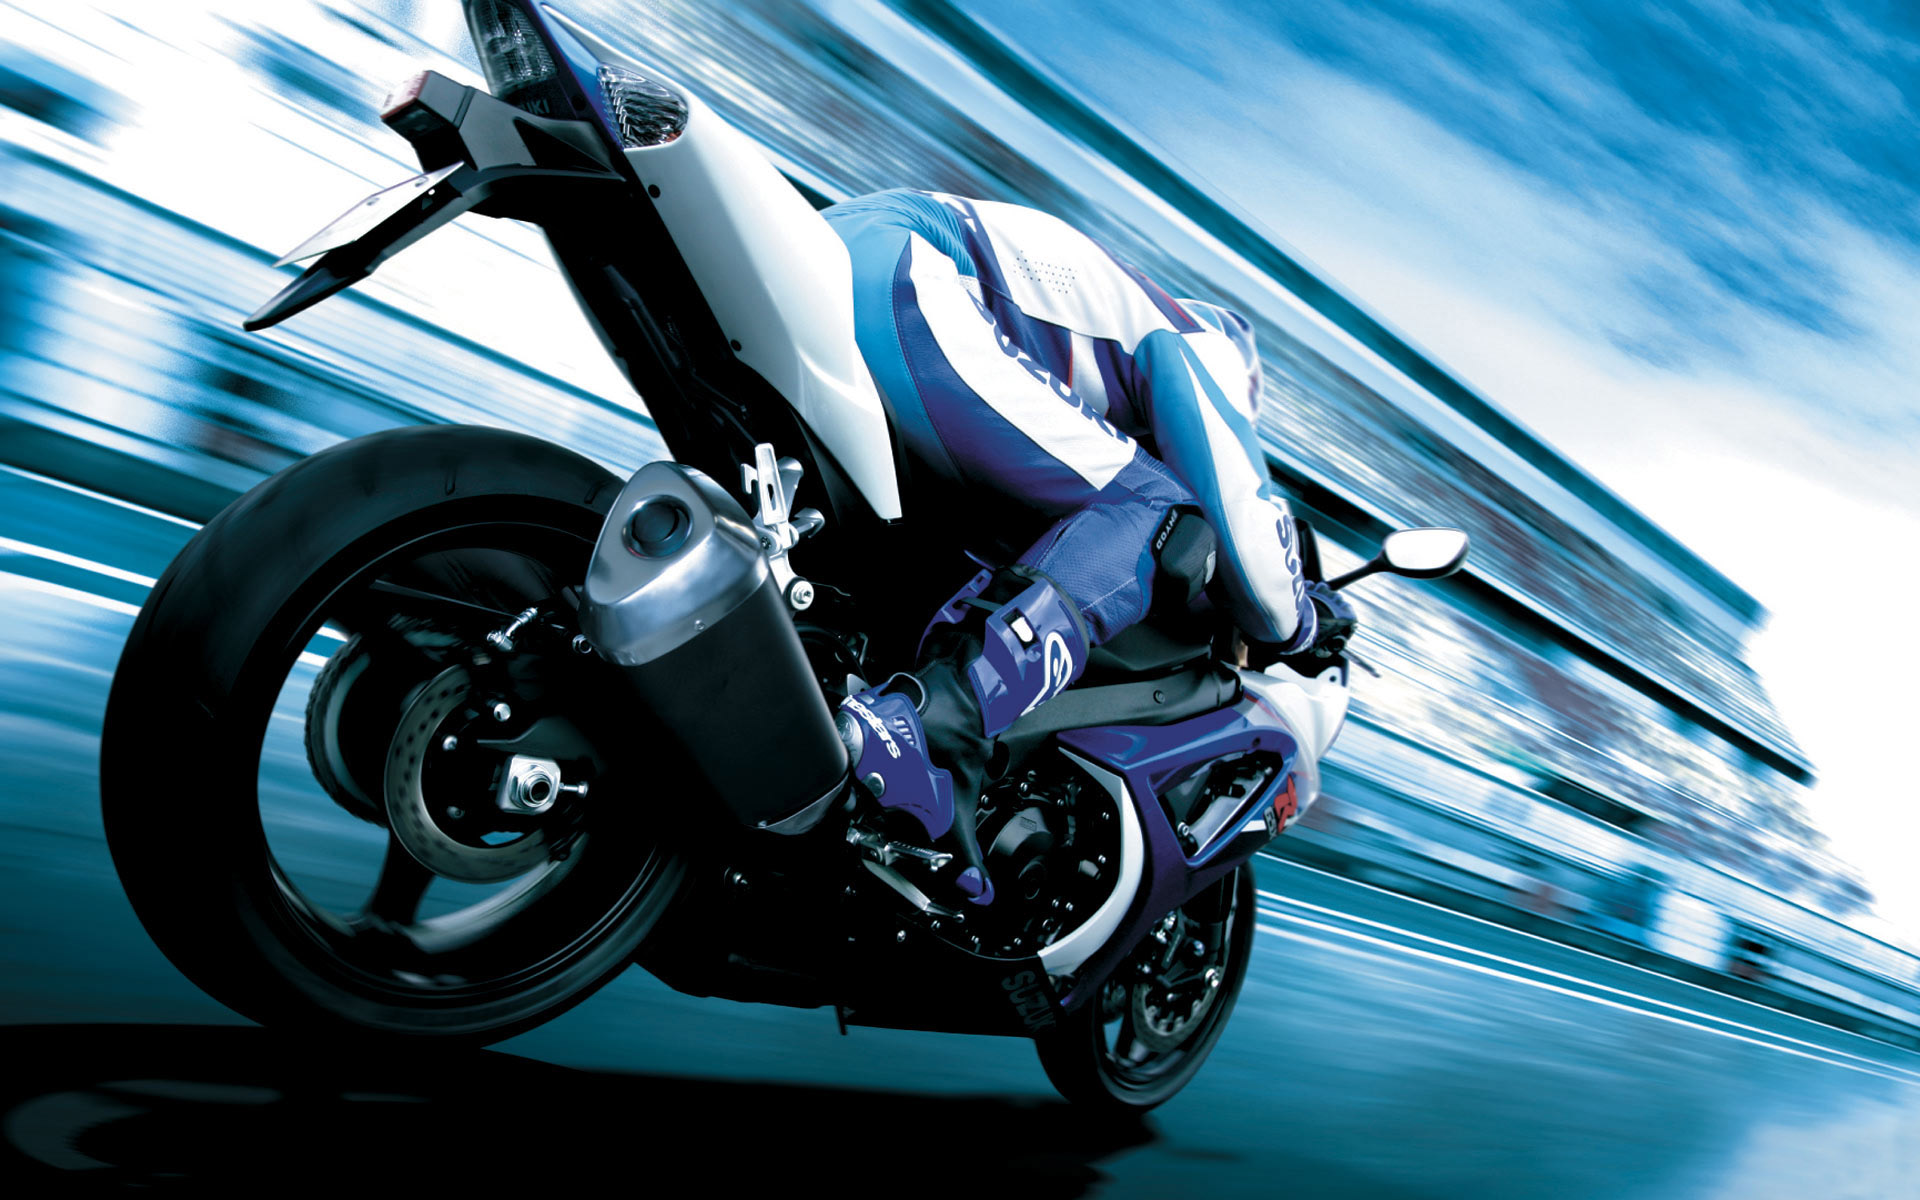 Windows Backgrounds vehicles, motorcycle, motorcycles